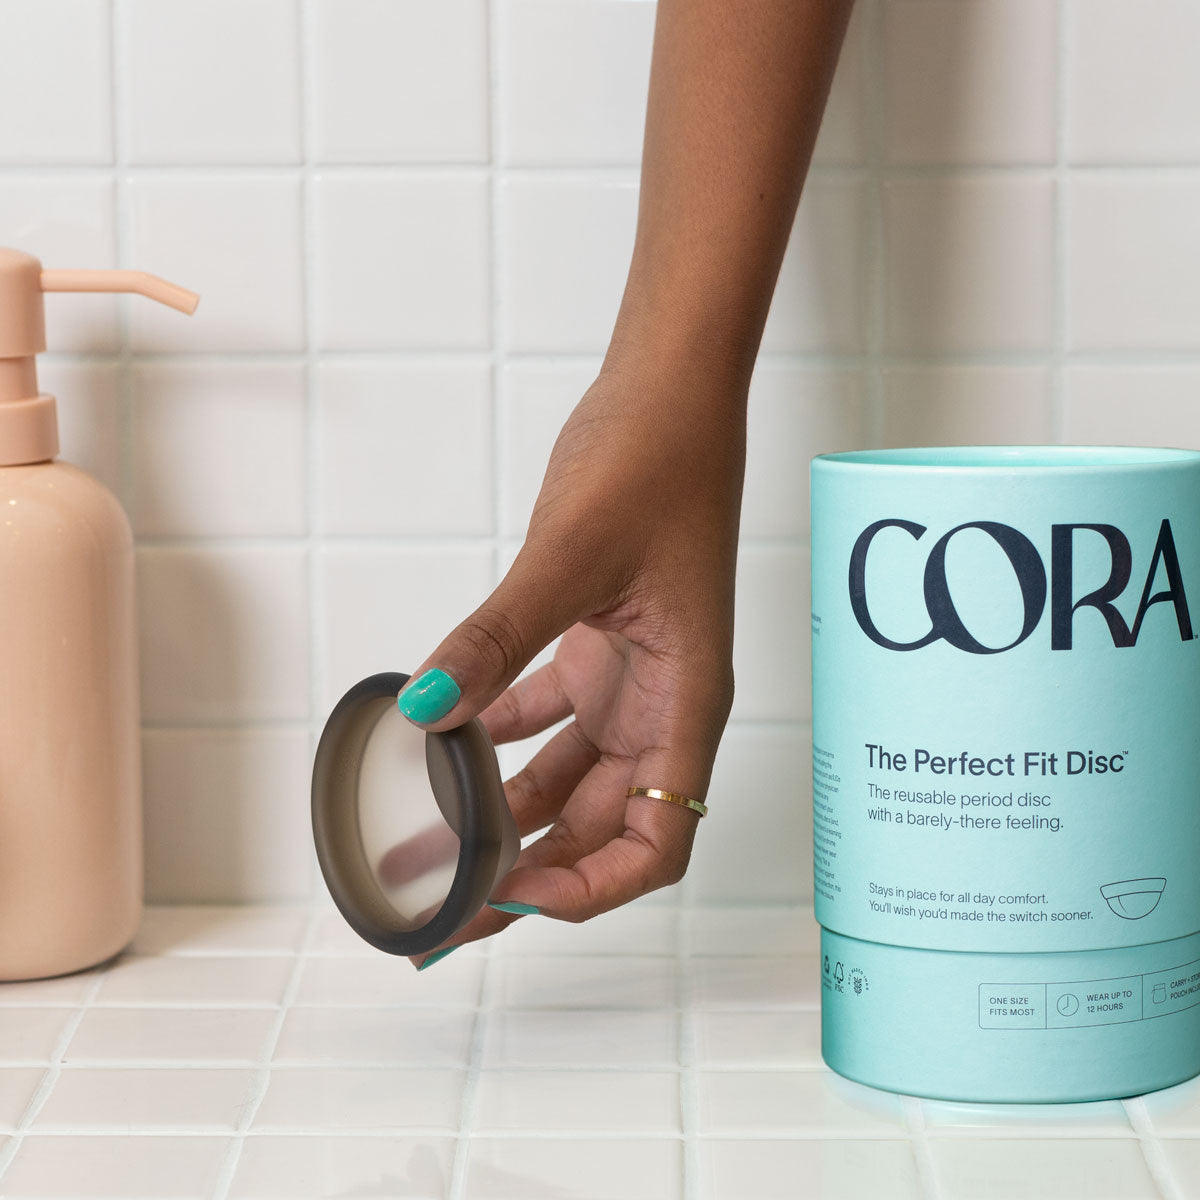 cora perfect fit disc in model hand on white tiles